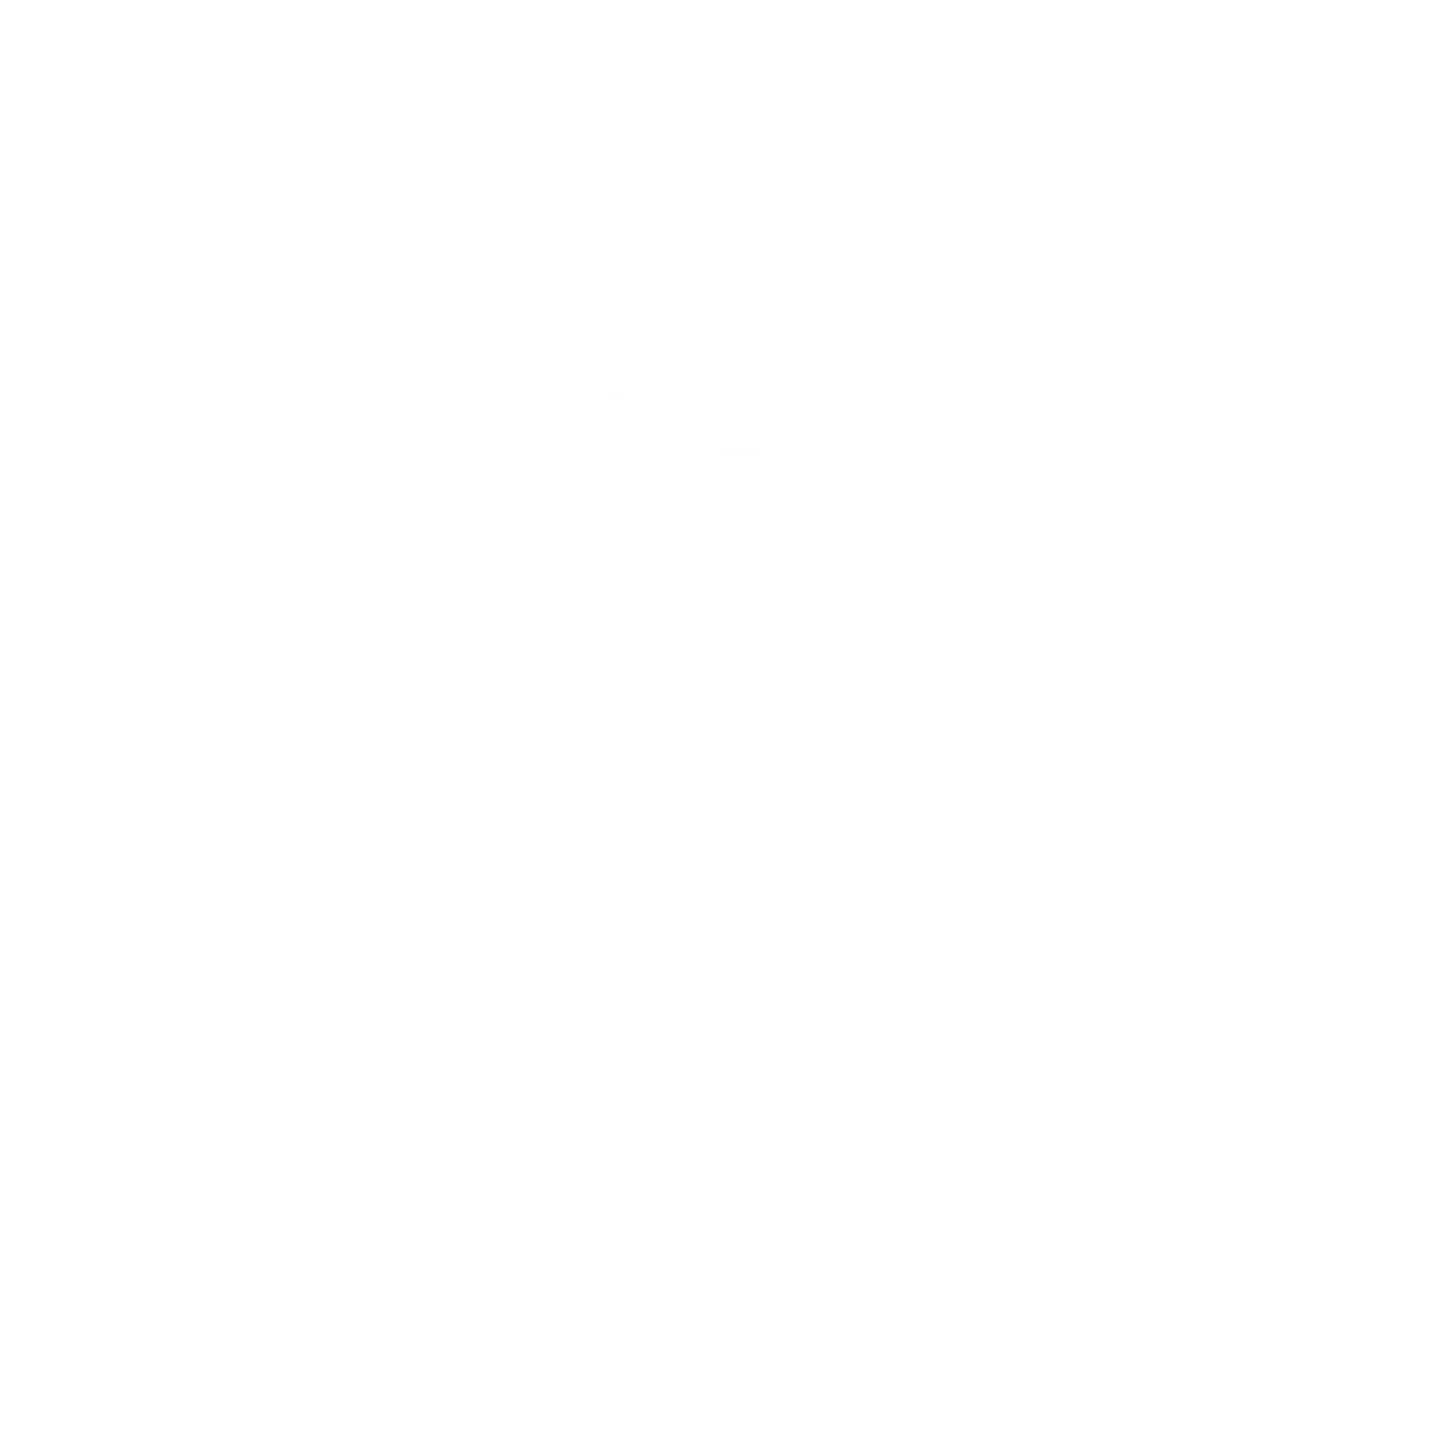 I take the "THE" out of PSYCHOTHERAPIST